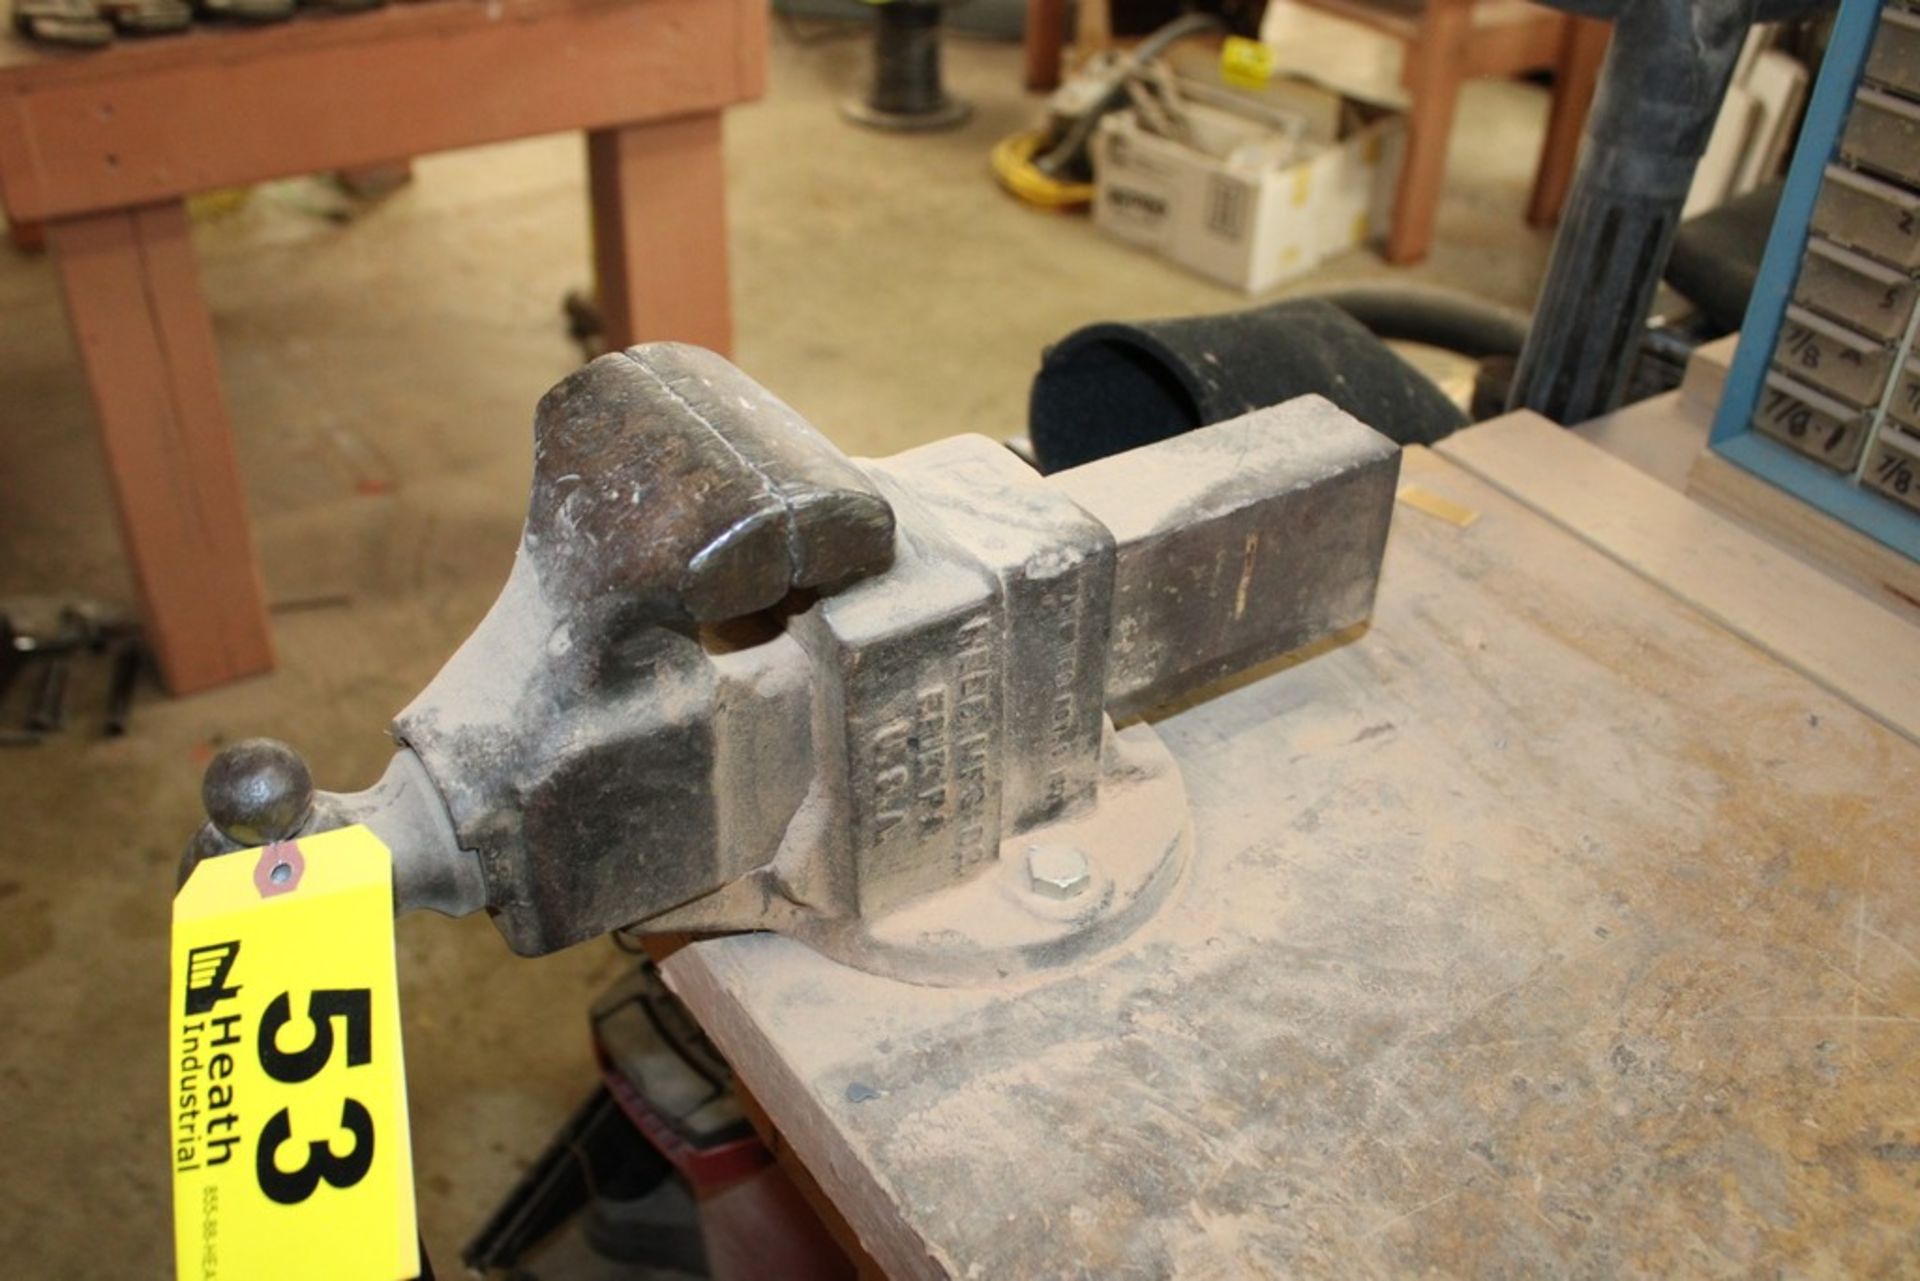 REED NO. 204 4" VISE WITH WORKBENCH, 6' X 30" X 35" - Image 2 of 2